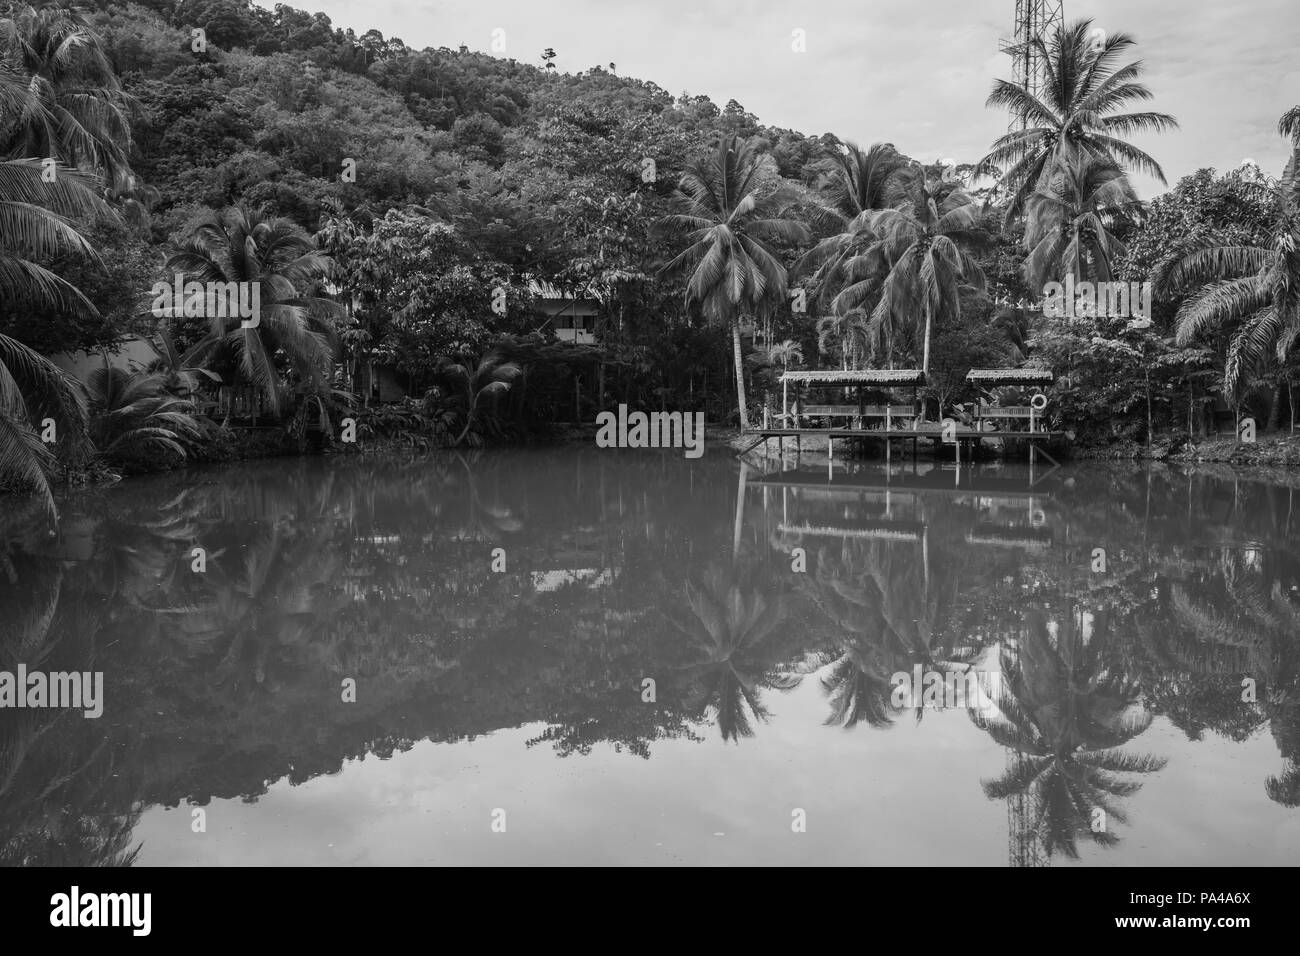 Lake Reflection in the Phuket, Thailand. Surface of lakes like a mirror reflect the image above, double image of landscape. Stock Photo